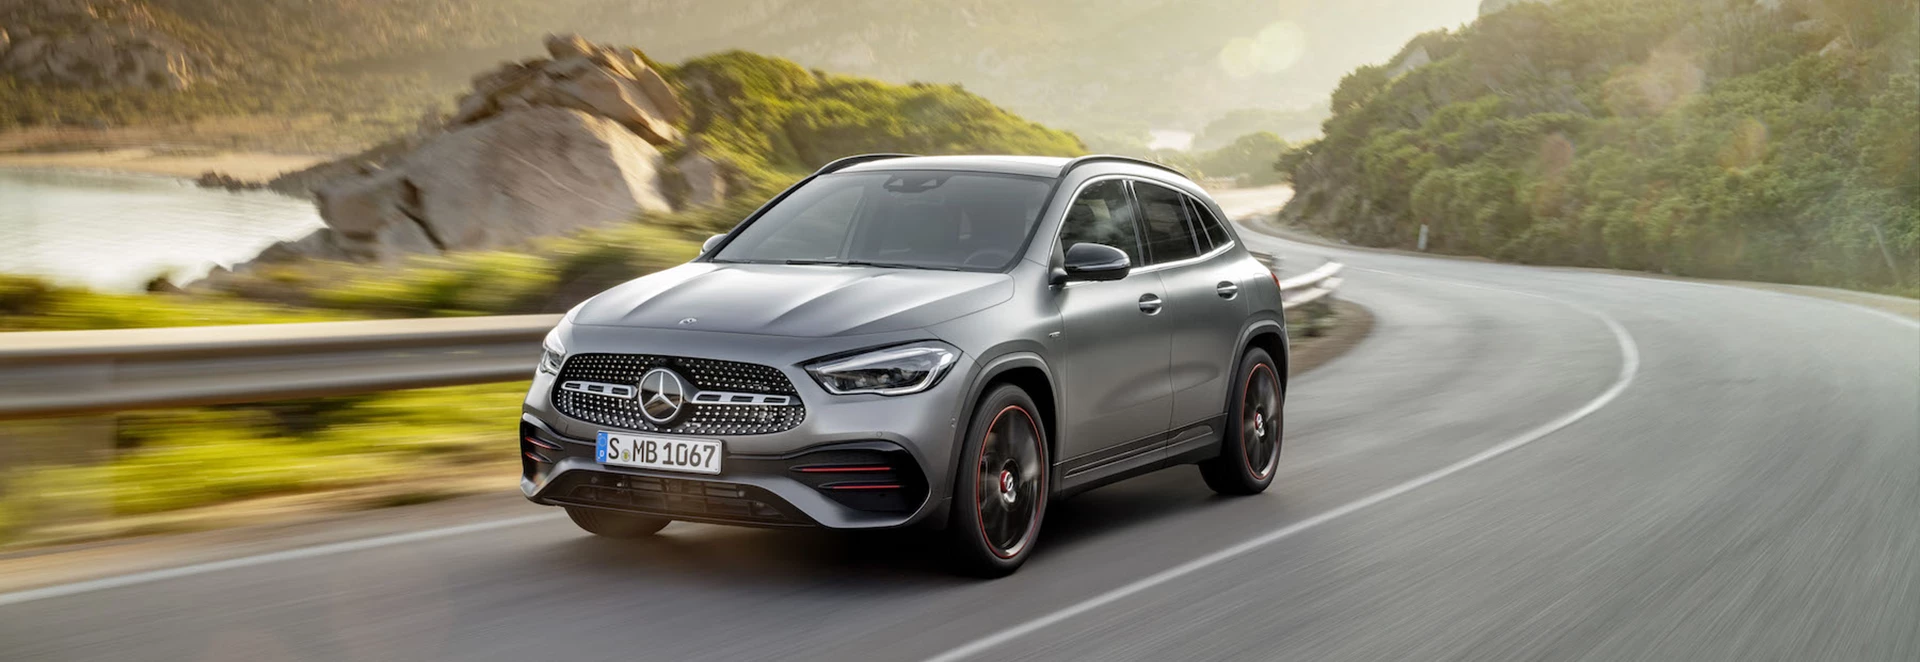 All-new Mercedes-Benz GLA crossover revealed